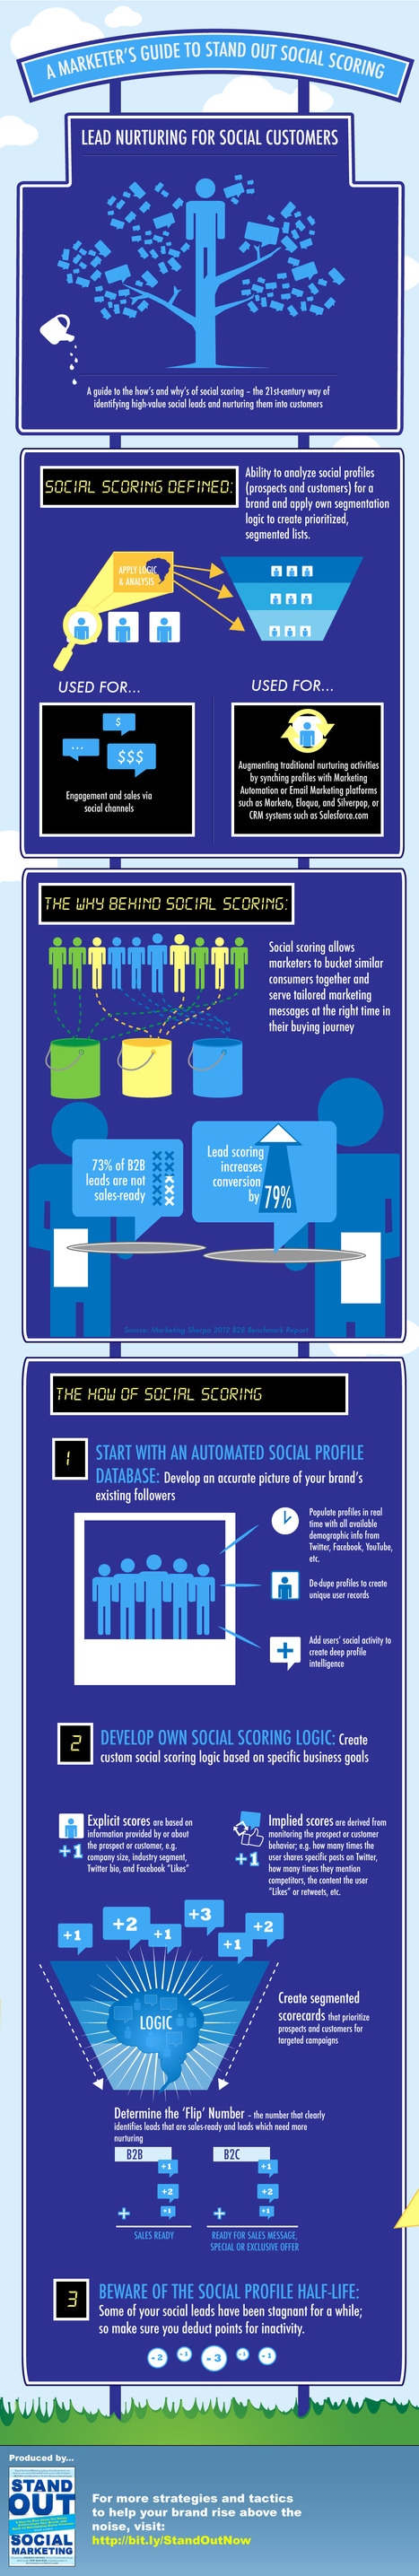 A Marketer’s Guide to Social Scoring (Infographic) | Digital-News on Scoop.it today | Scoop.it